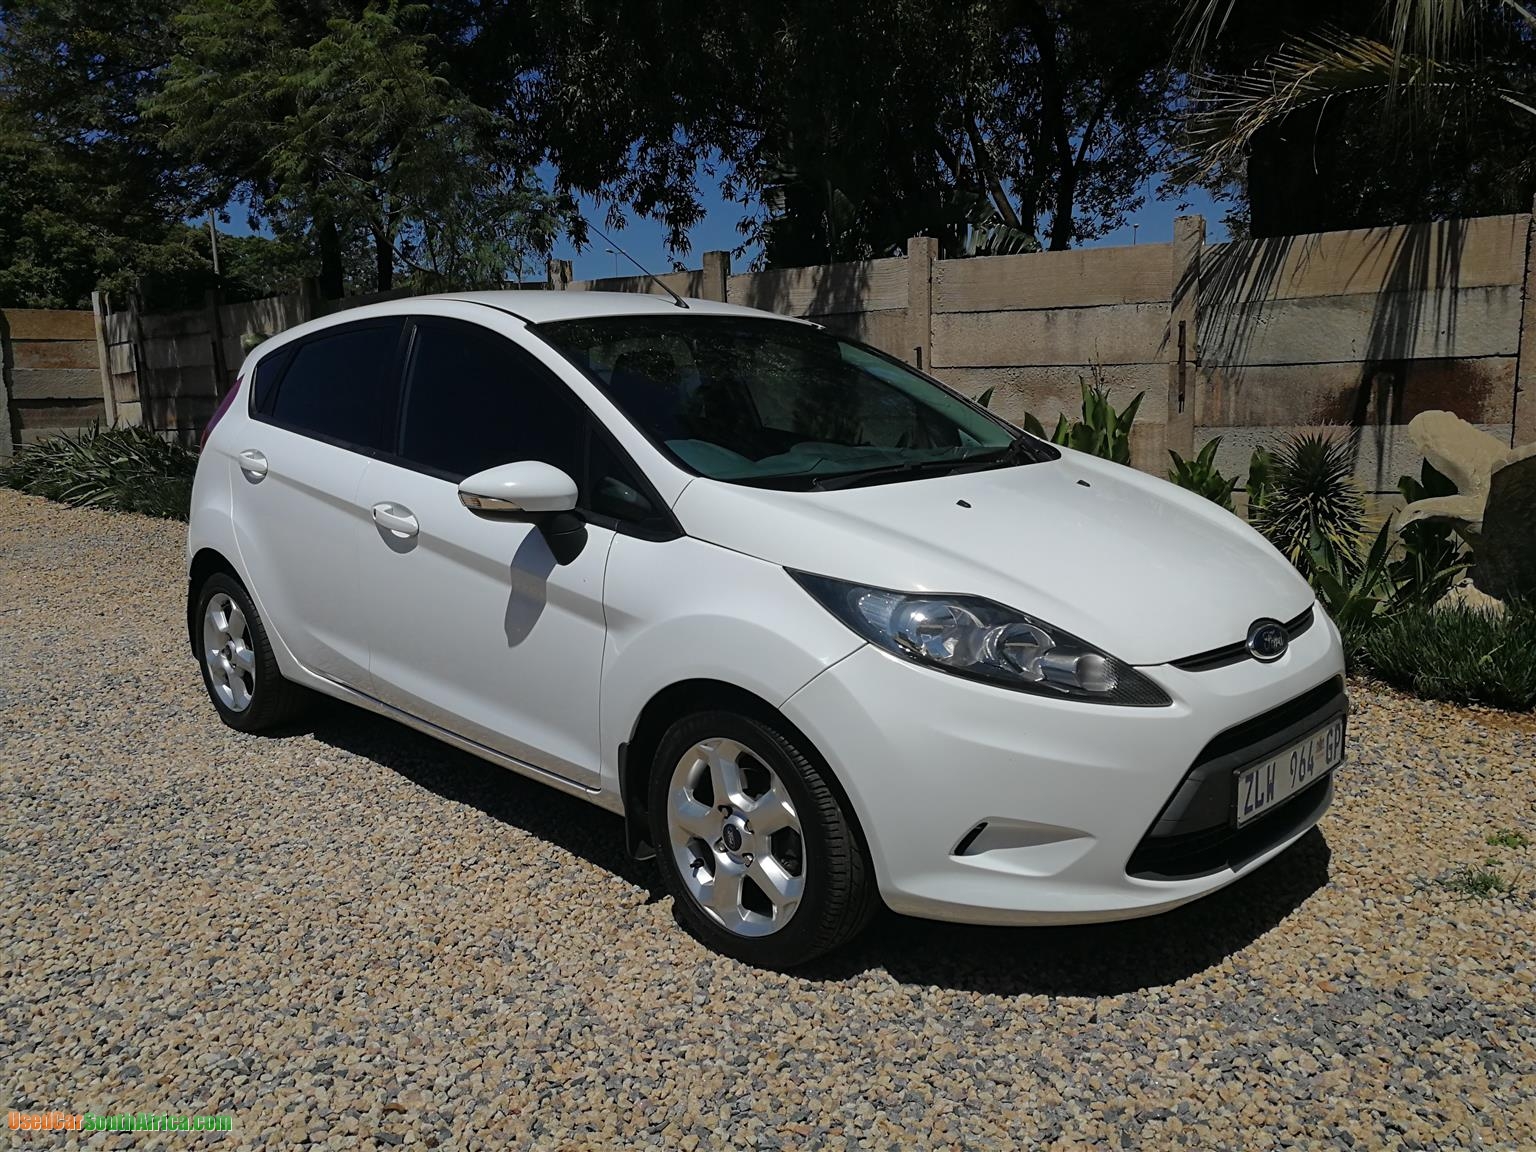 2010 Ford Fiesta R45,000 only used car for sale in Boksburg Gauteng South Africa ...